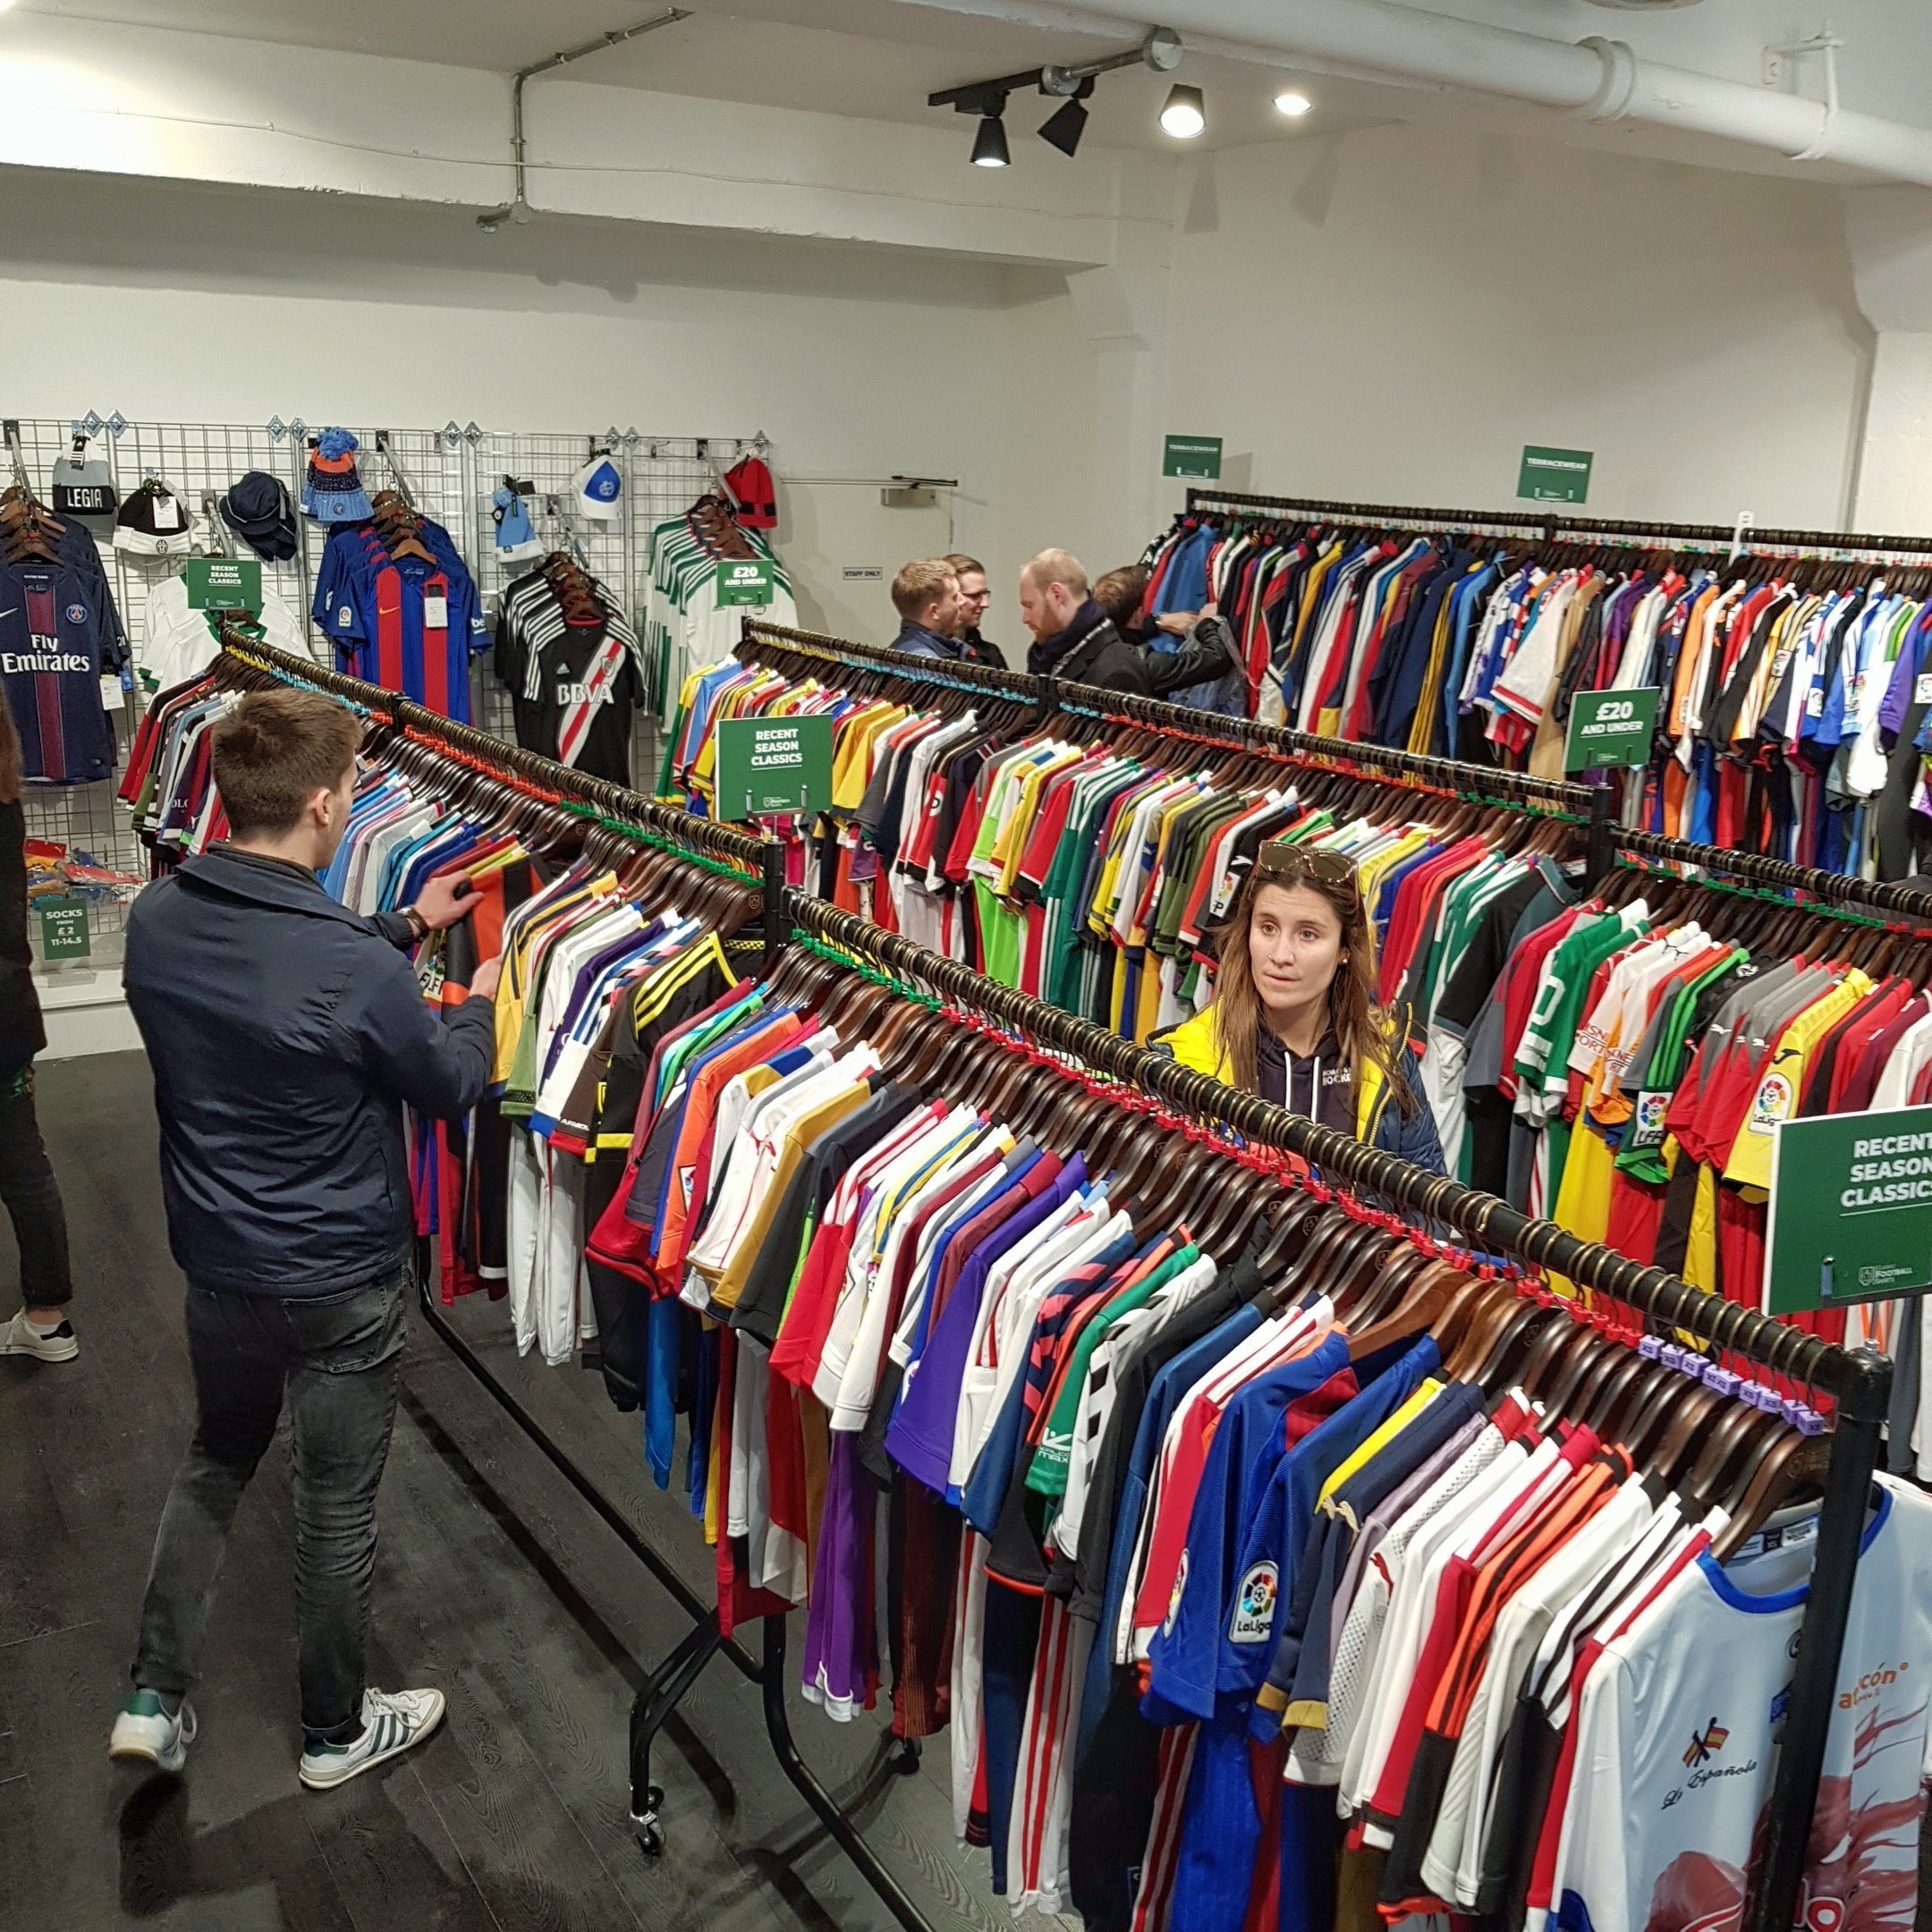 Classic Football Shirts Shop in the Old Truman Brewery off Brick